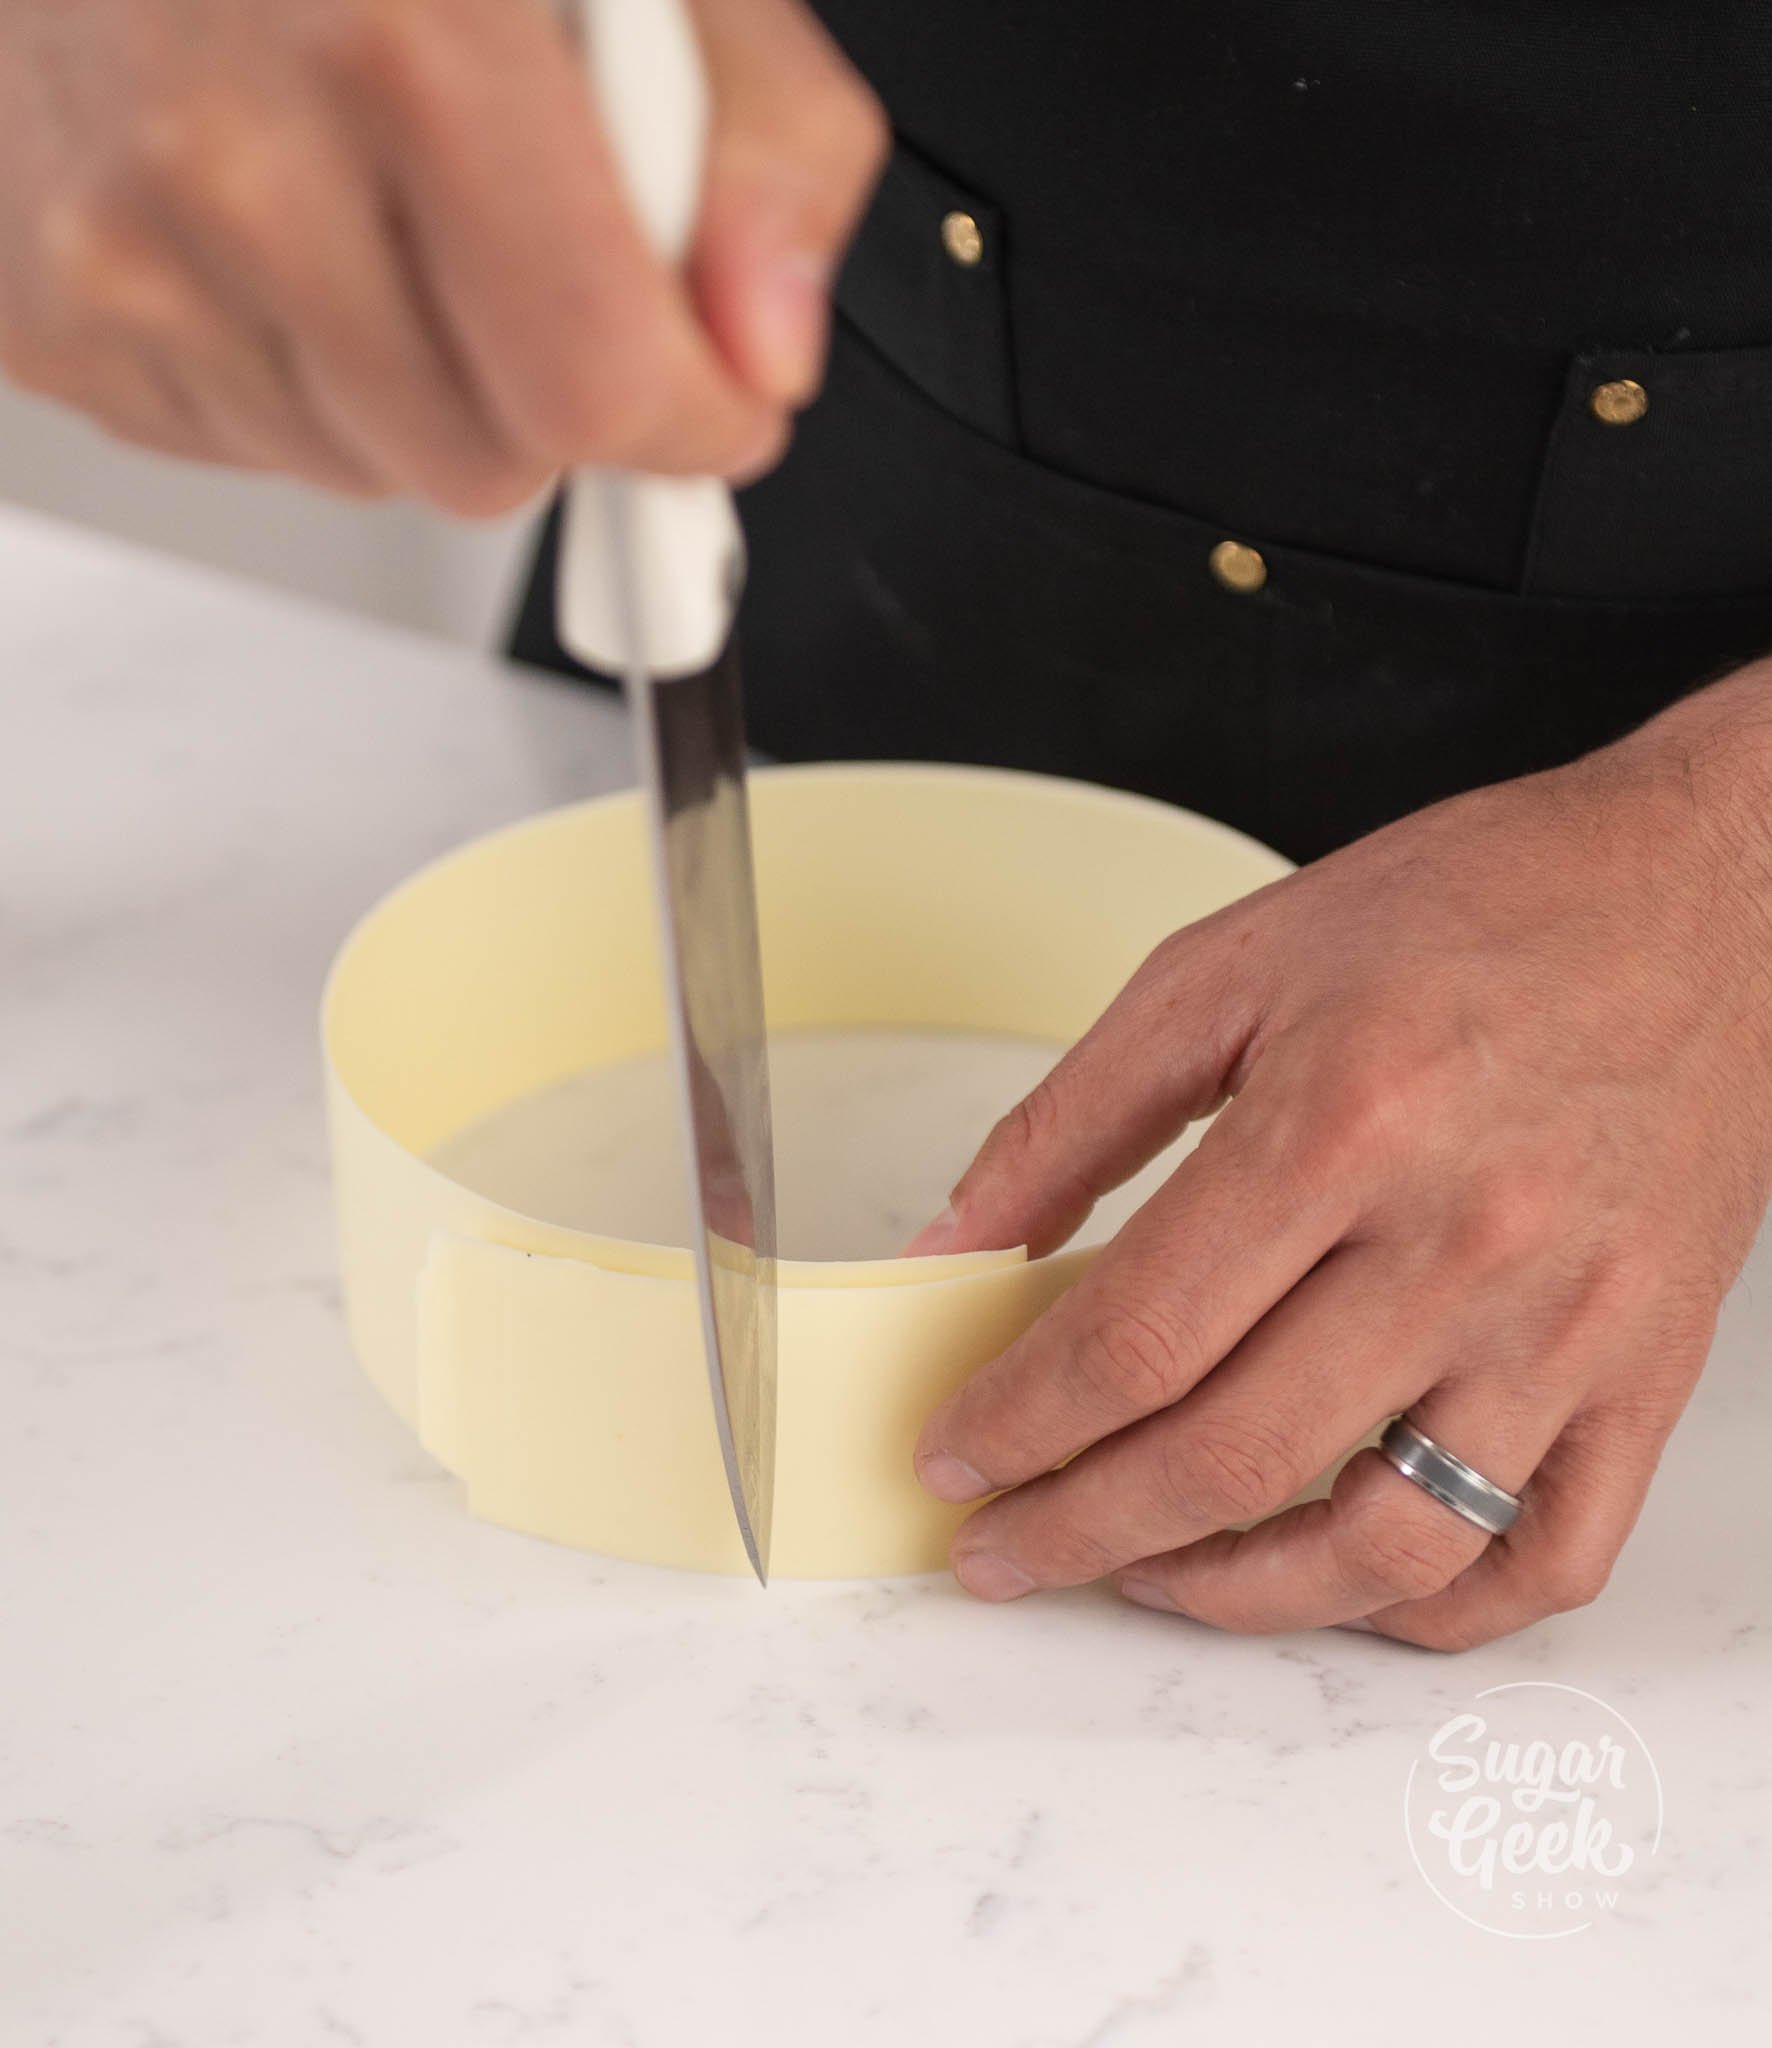 hands using knife to cut chocolate ring.